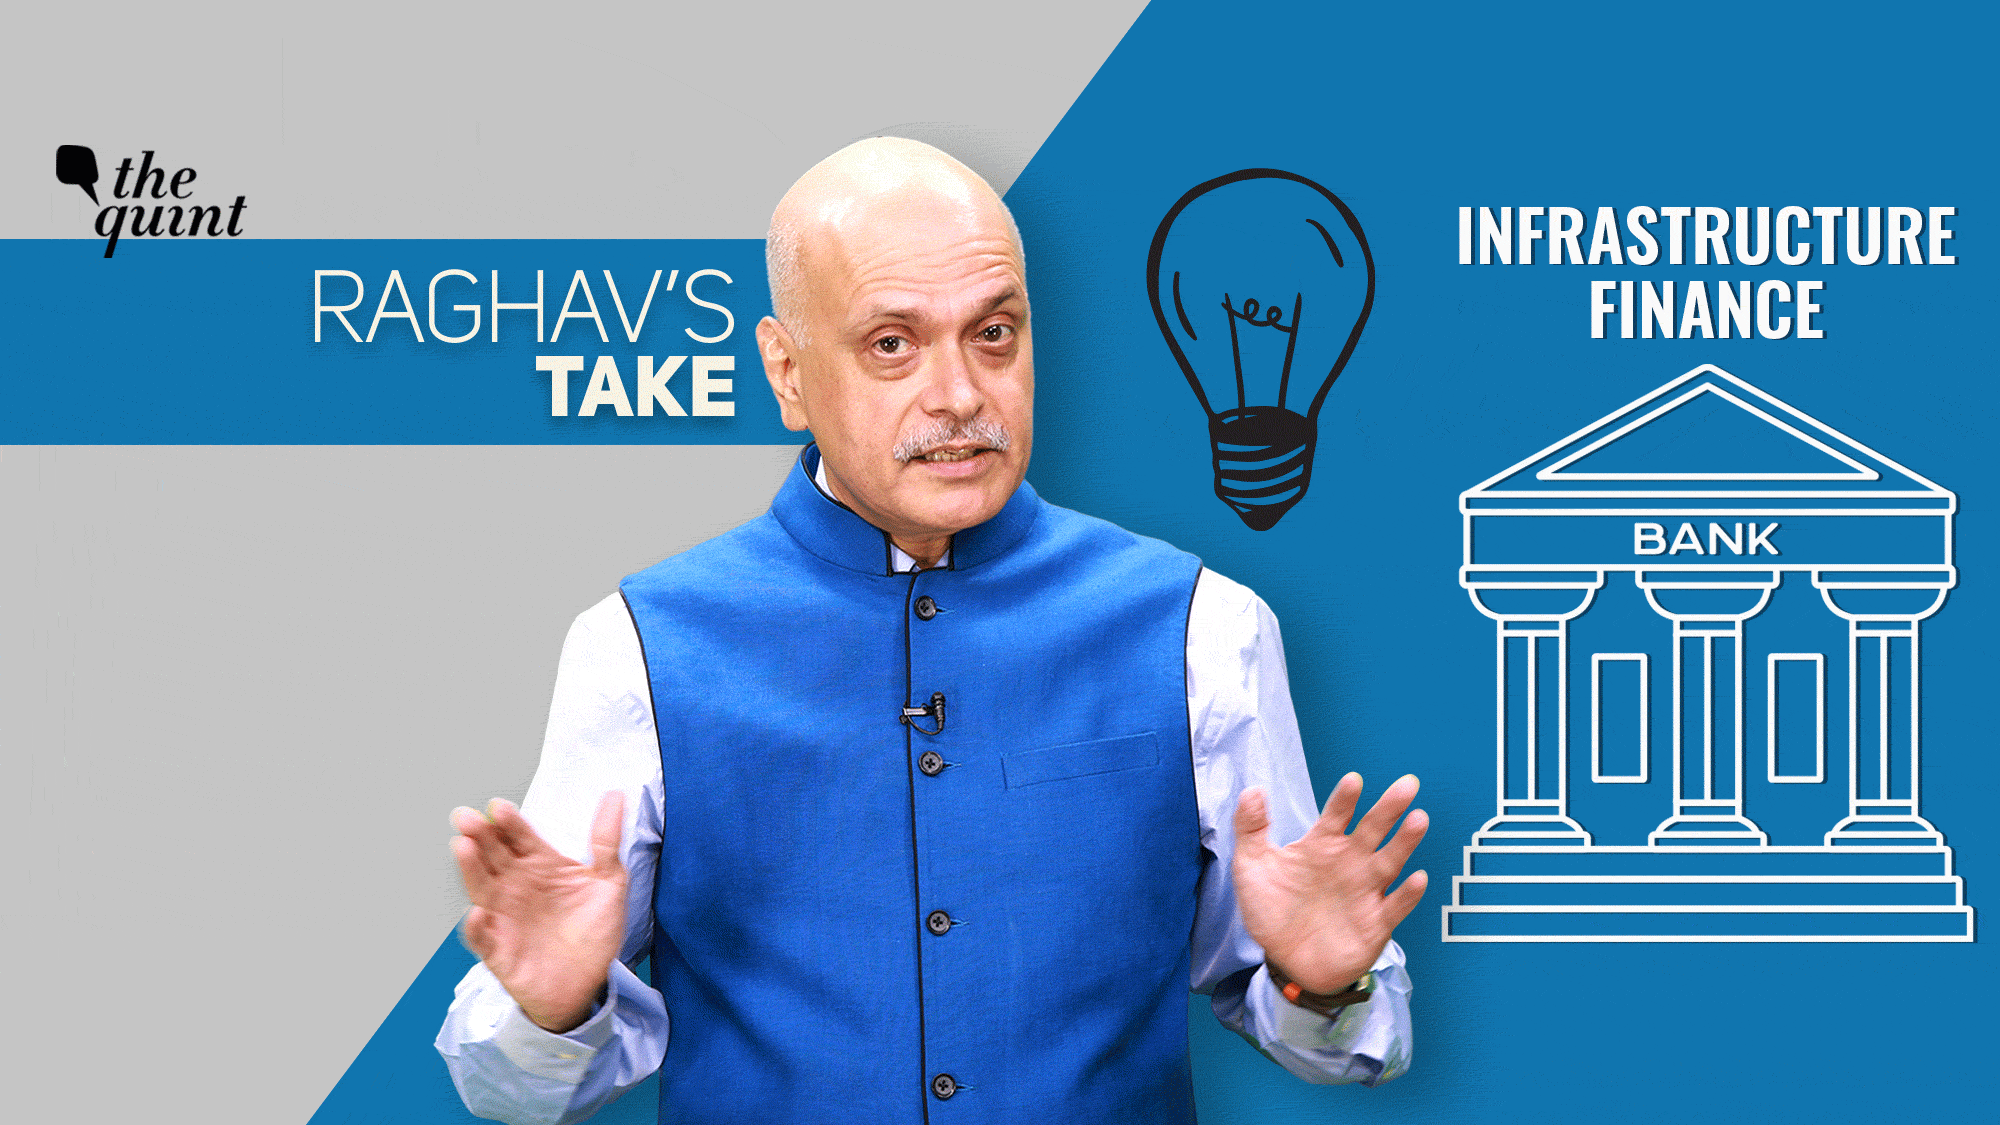 Image of The Quint’s Co-Founder &amp; Editor-in-Chief, Raghav Bahl, used for representational purposes.